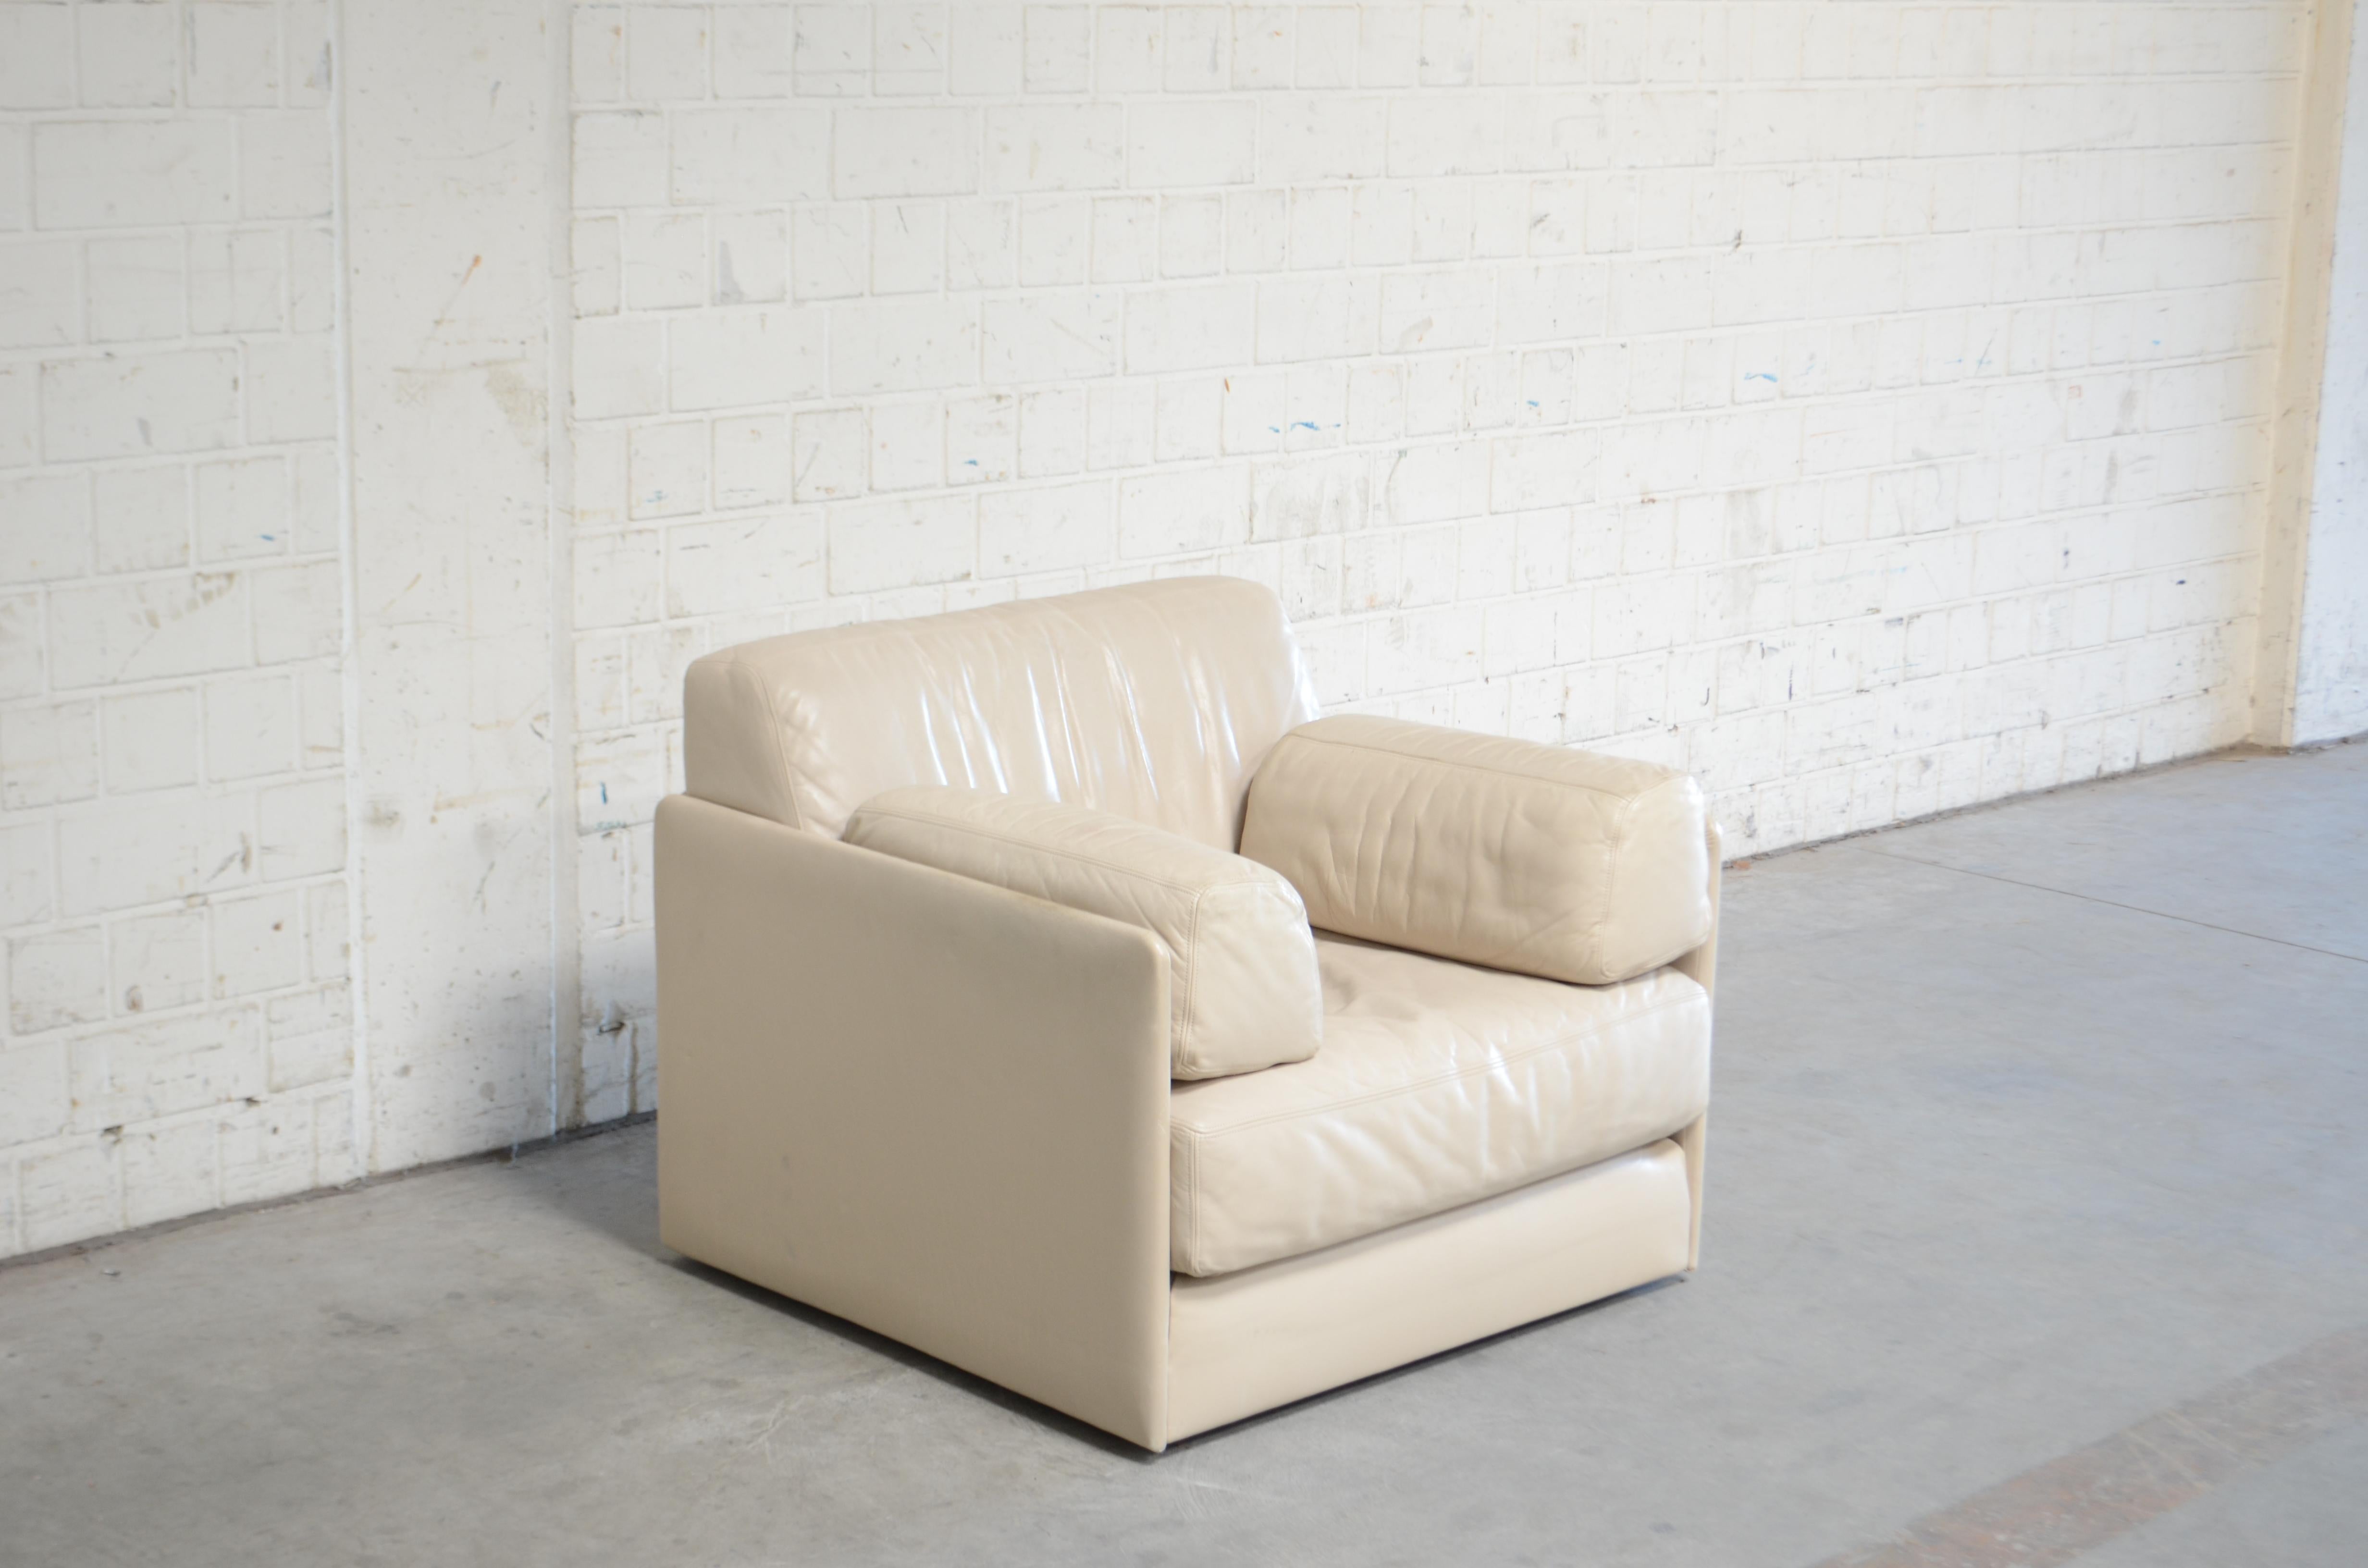 De Sede armchair in crème white leather.
The chair can be converted into a daybed for 1 single person. 
Classic design from Switzerland.